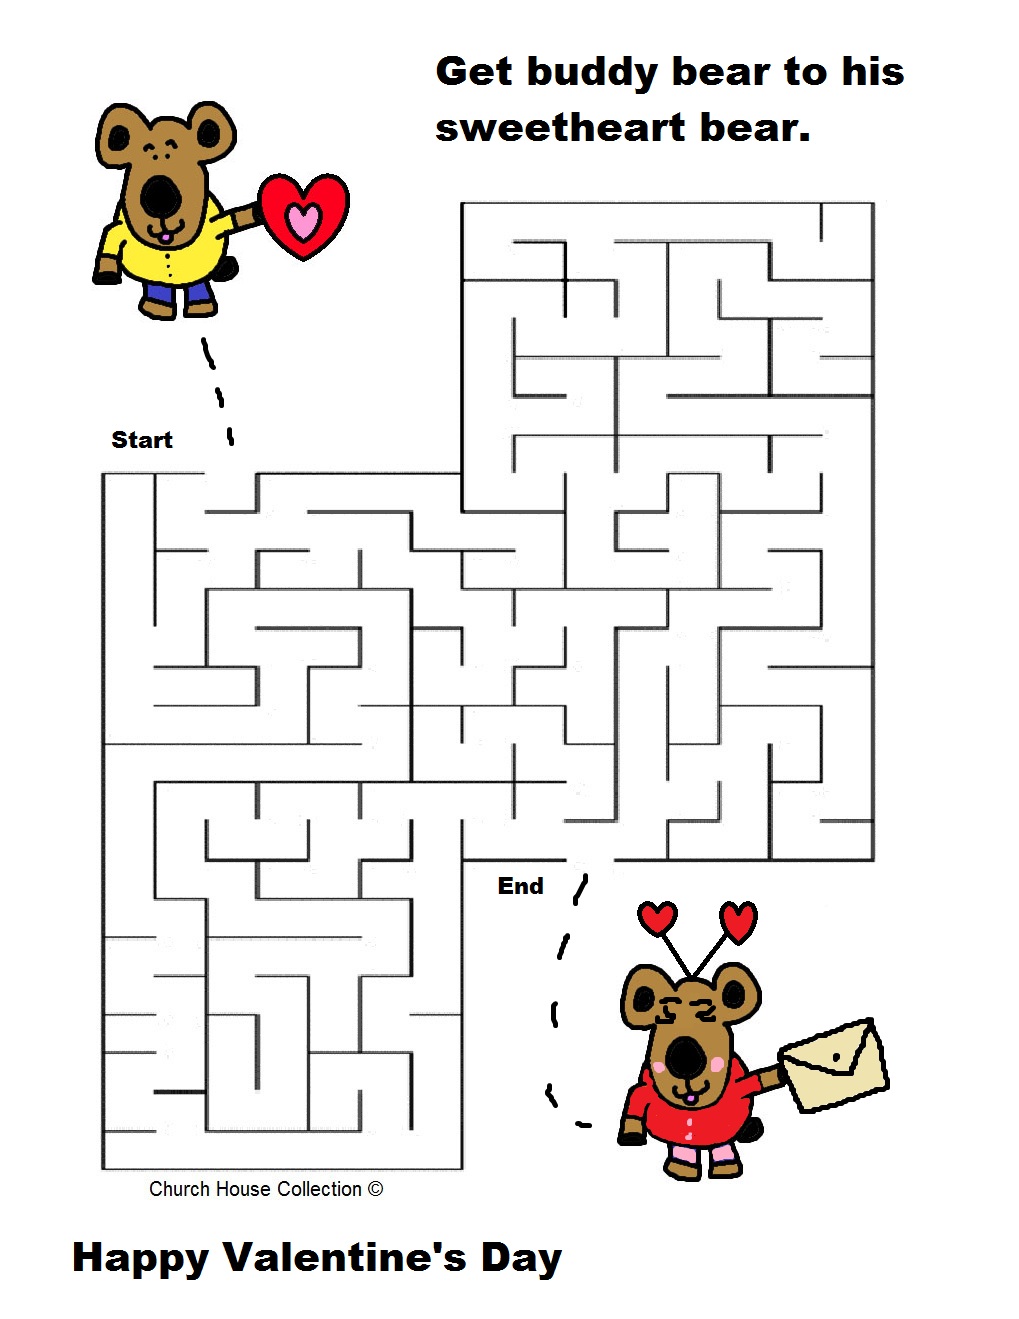 church-house-collection-blog-valentine-s-day-mazes-for-school-teachers